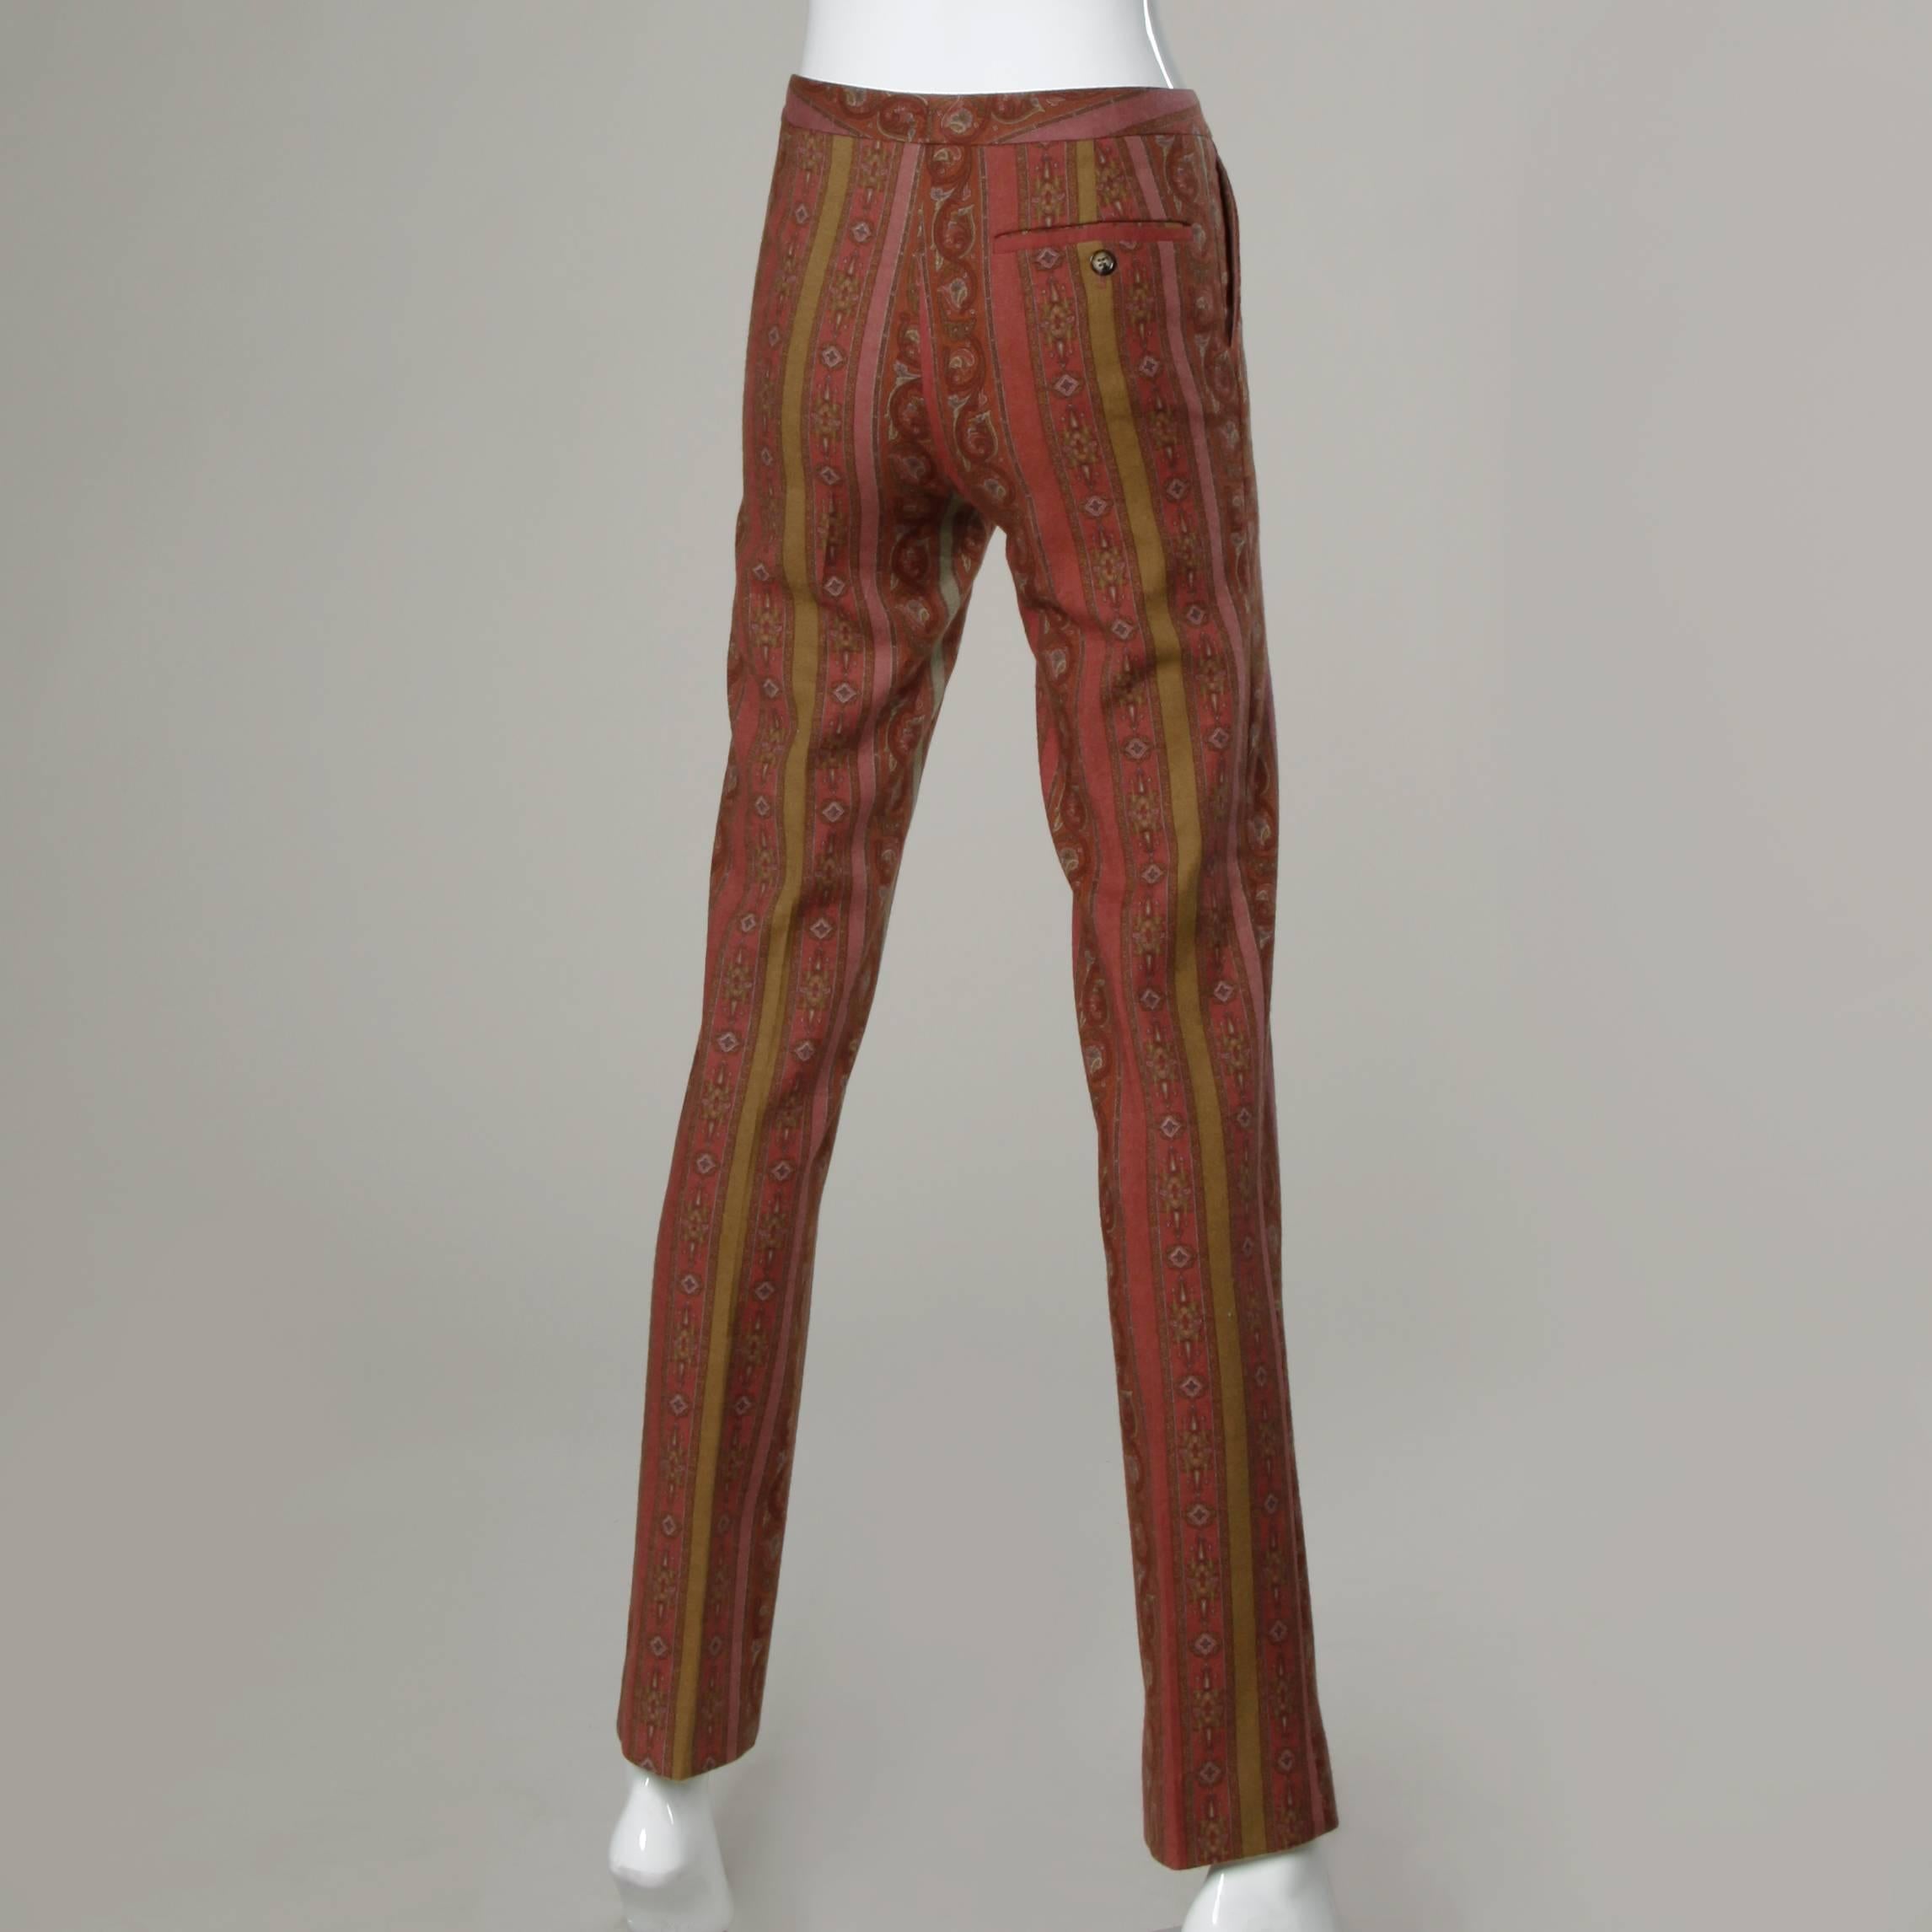 Wool blend paisley pants by Etro.

Details:

Fully Lined
Side Pockets and Back Pocket 
Front Zip and Button Closure
Marked Size: 38
Estimated Size: Small
Color: Maroon/ Rose/ Light Green
Fabric: 92% Wool/ 6% Nylon/ 2% Elastan 
Label: